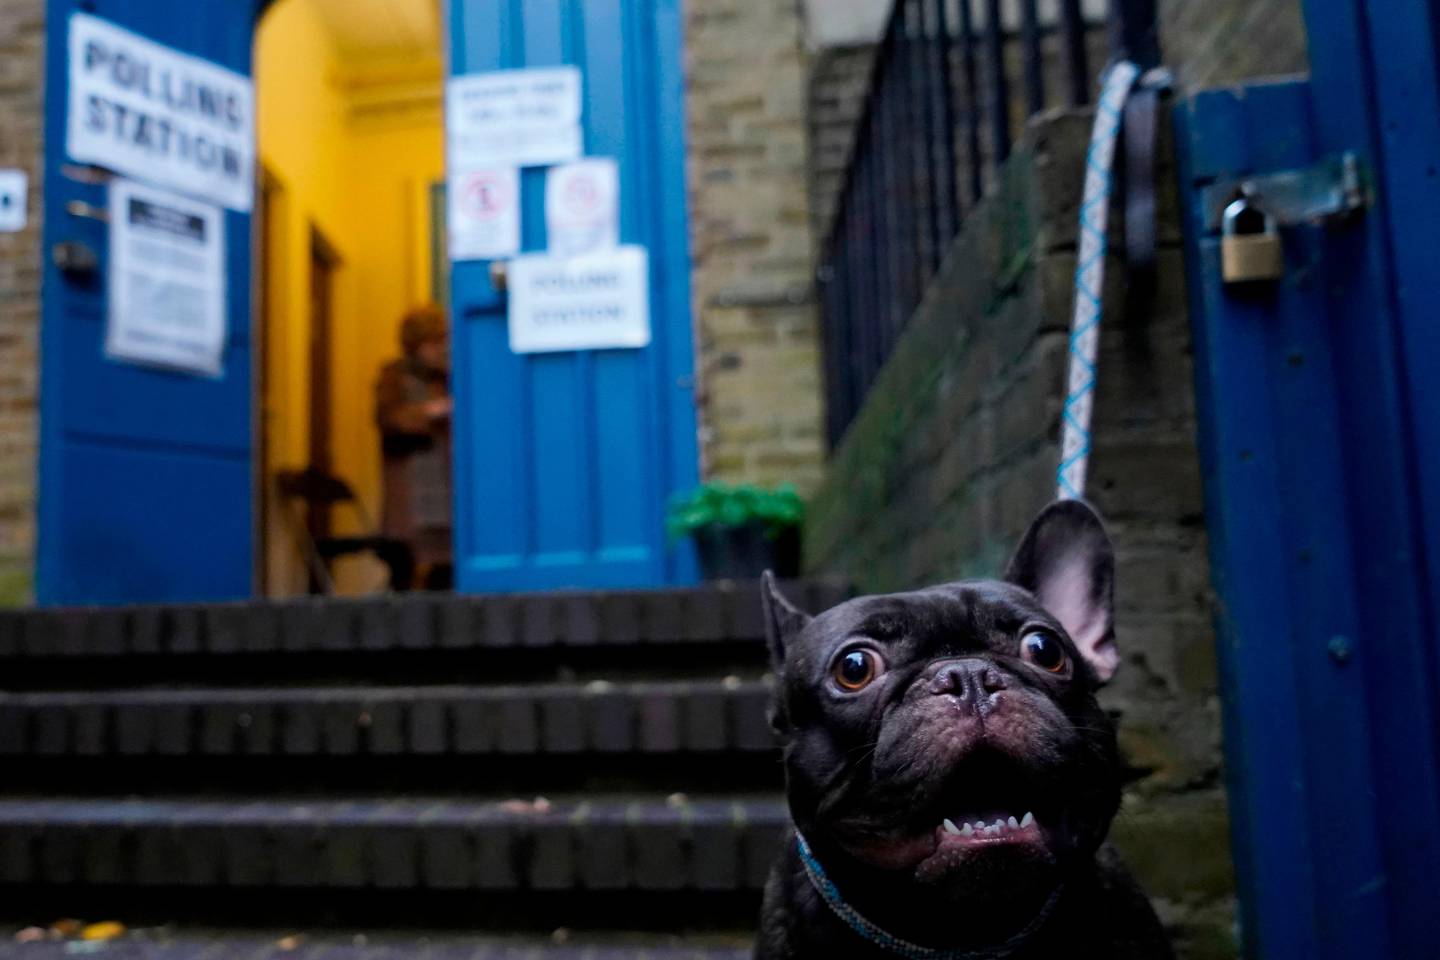 A dog is tied up to railings outside St John's parish hall polling station in London as Britain holds a general election on December 12, 2019 (Photo by Niklas HALLE'N / AFP)